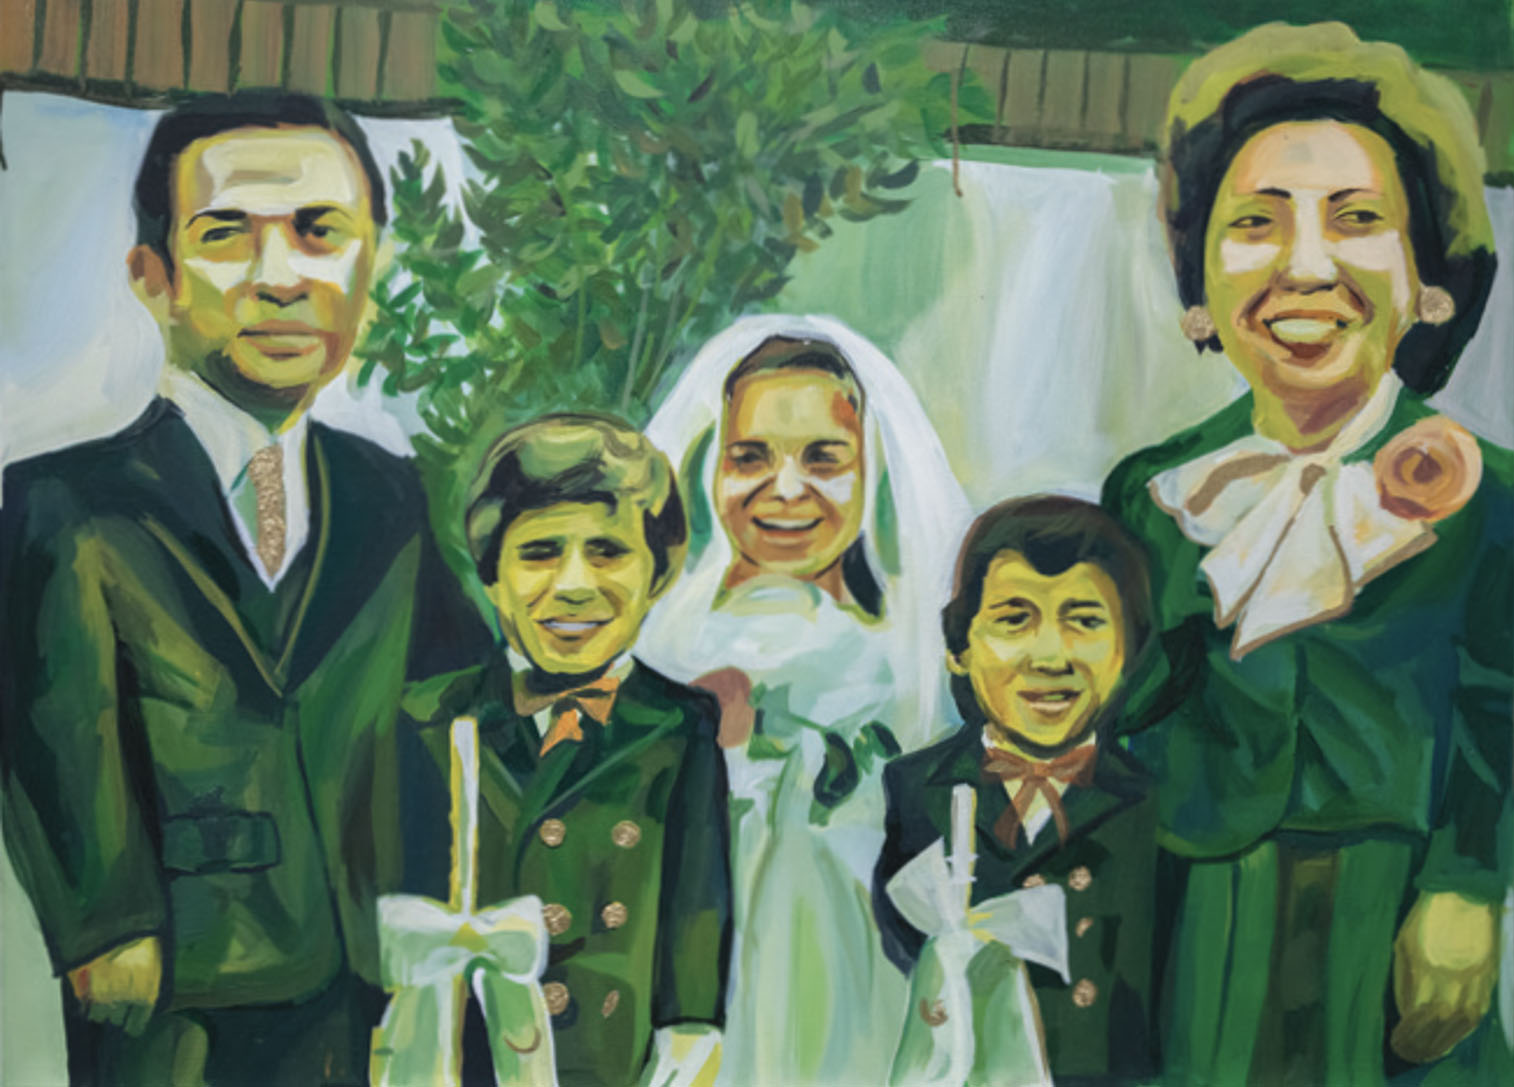 Painting emulating an old family photo